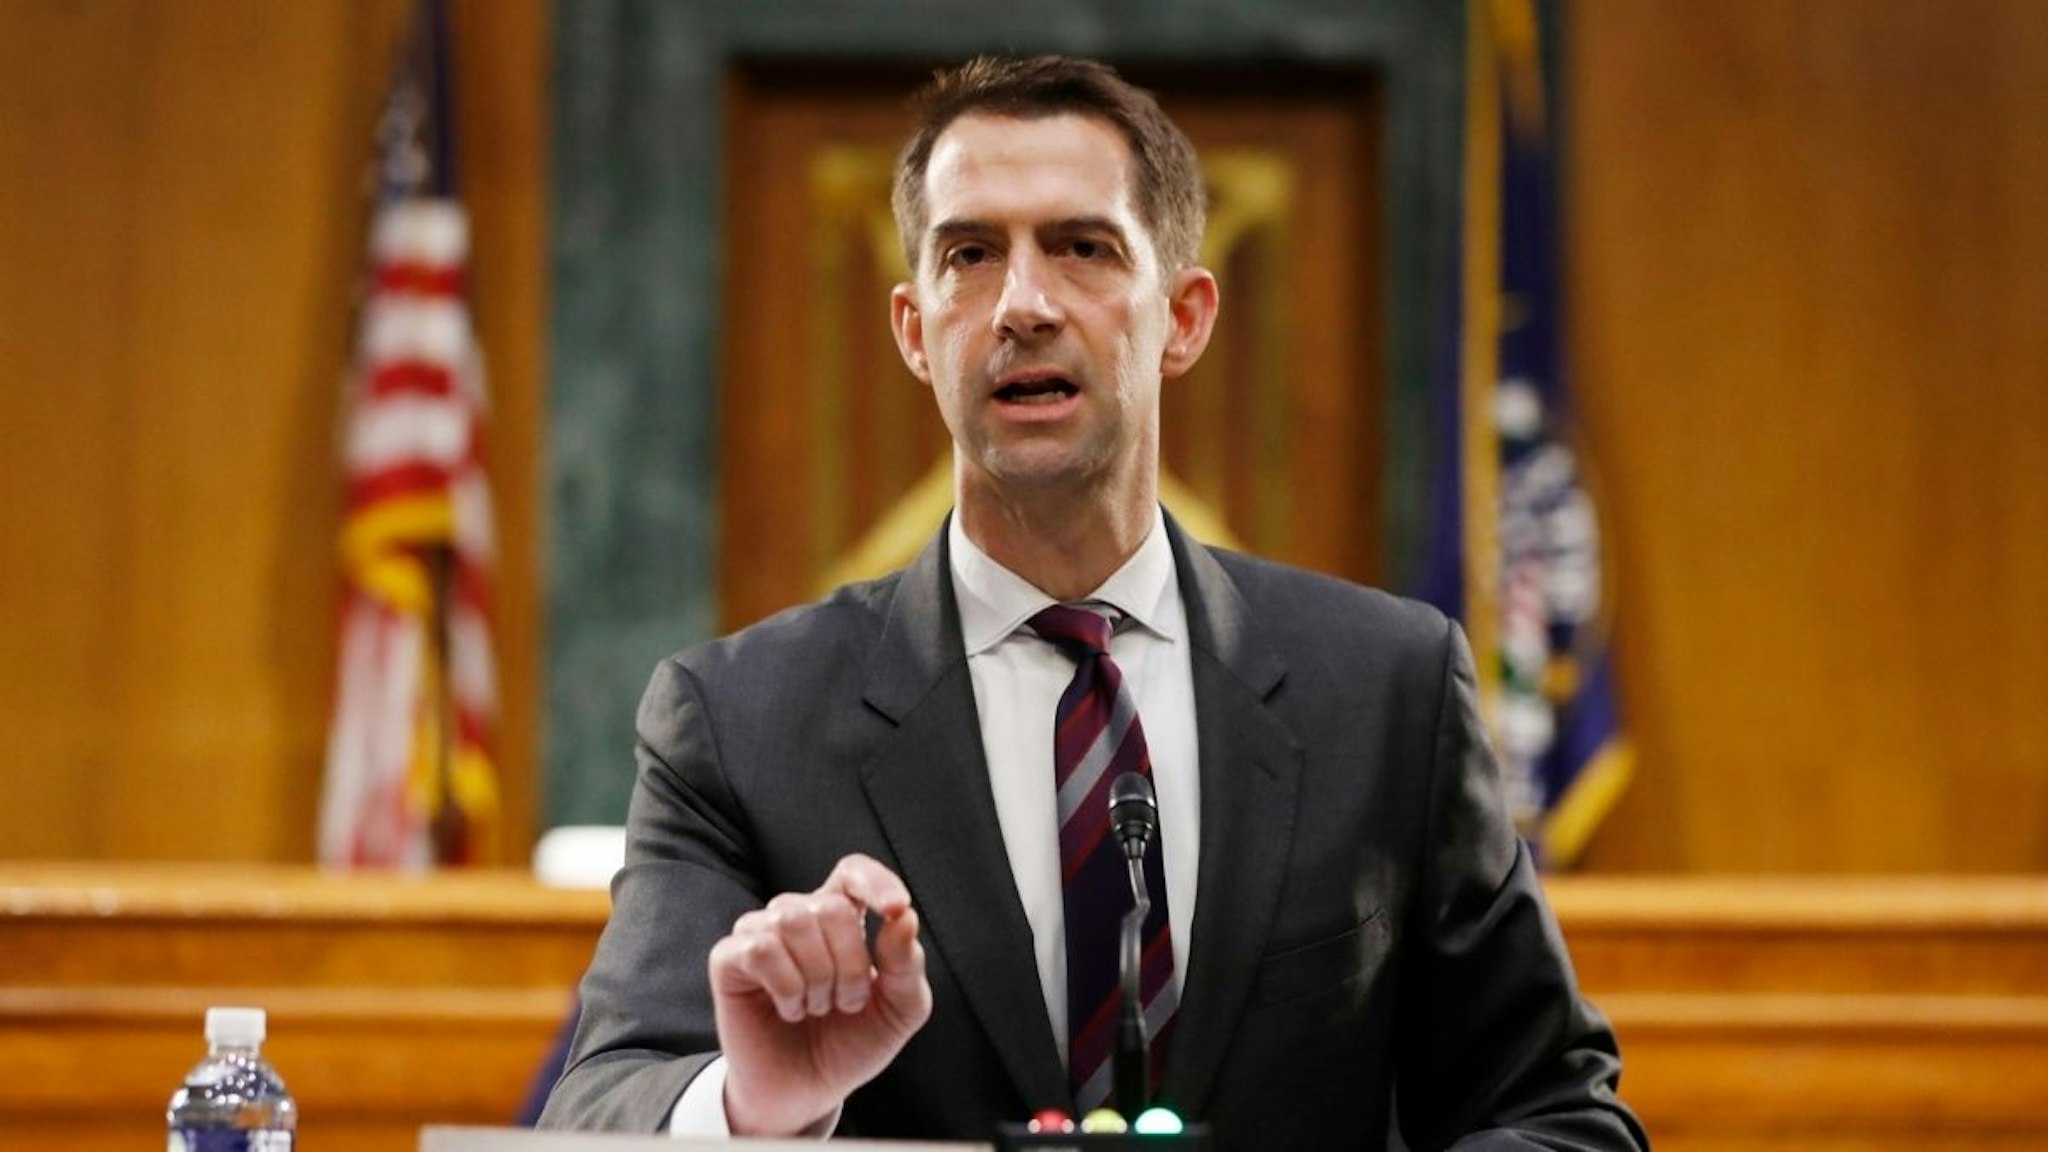 Sen. Tom Cotton, R-Ark., speaks during a Senate Intelligence Committee nomination hearing for Rep. John Ratcliffe, R-Texas, on Capitol Hill in Washington, Tuesday, May. 5, 2020.